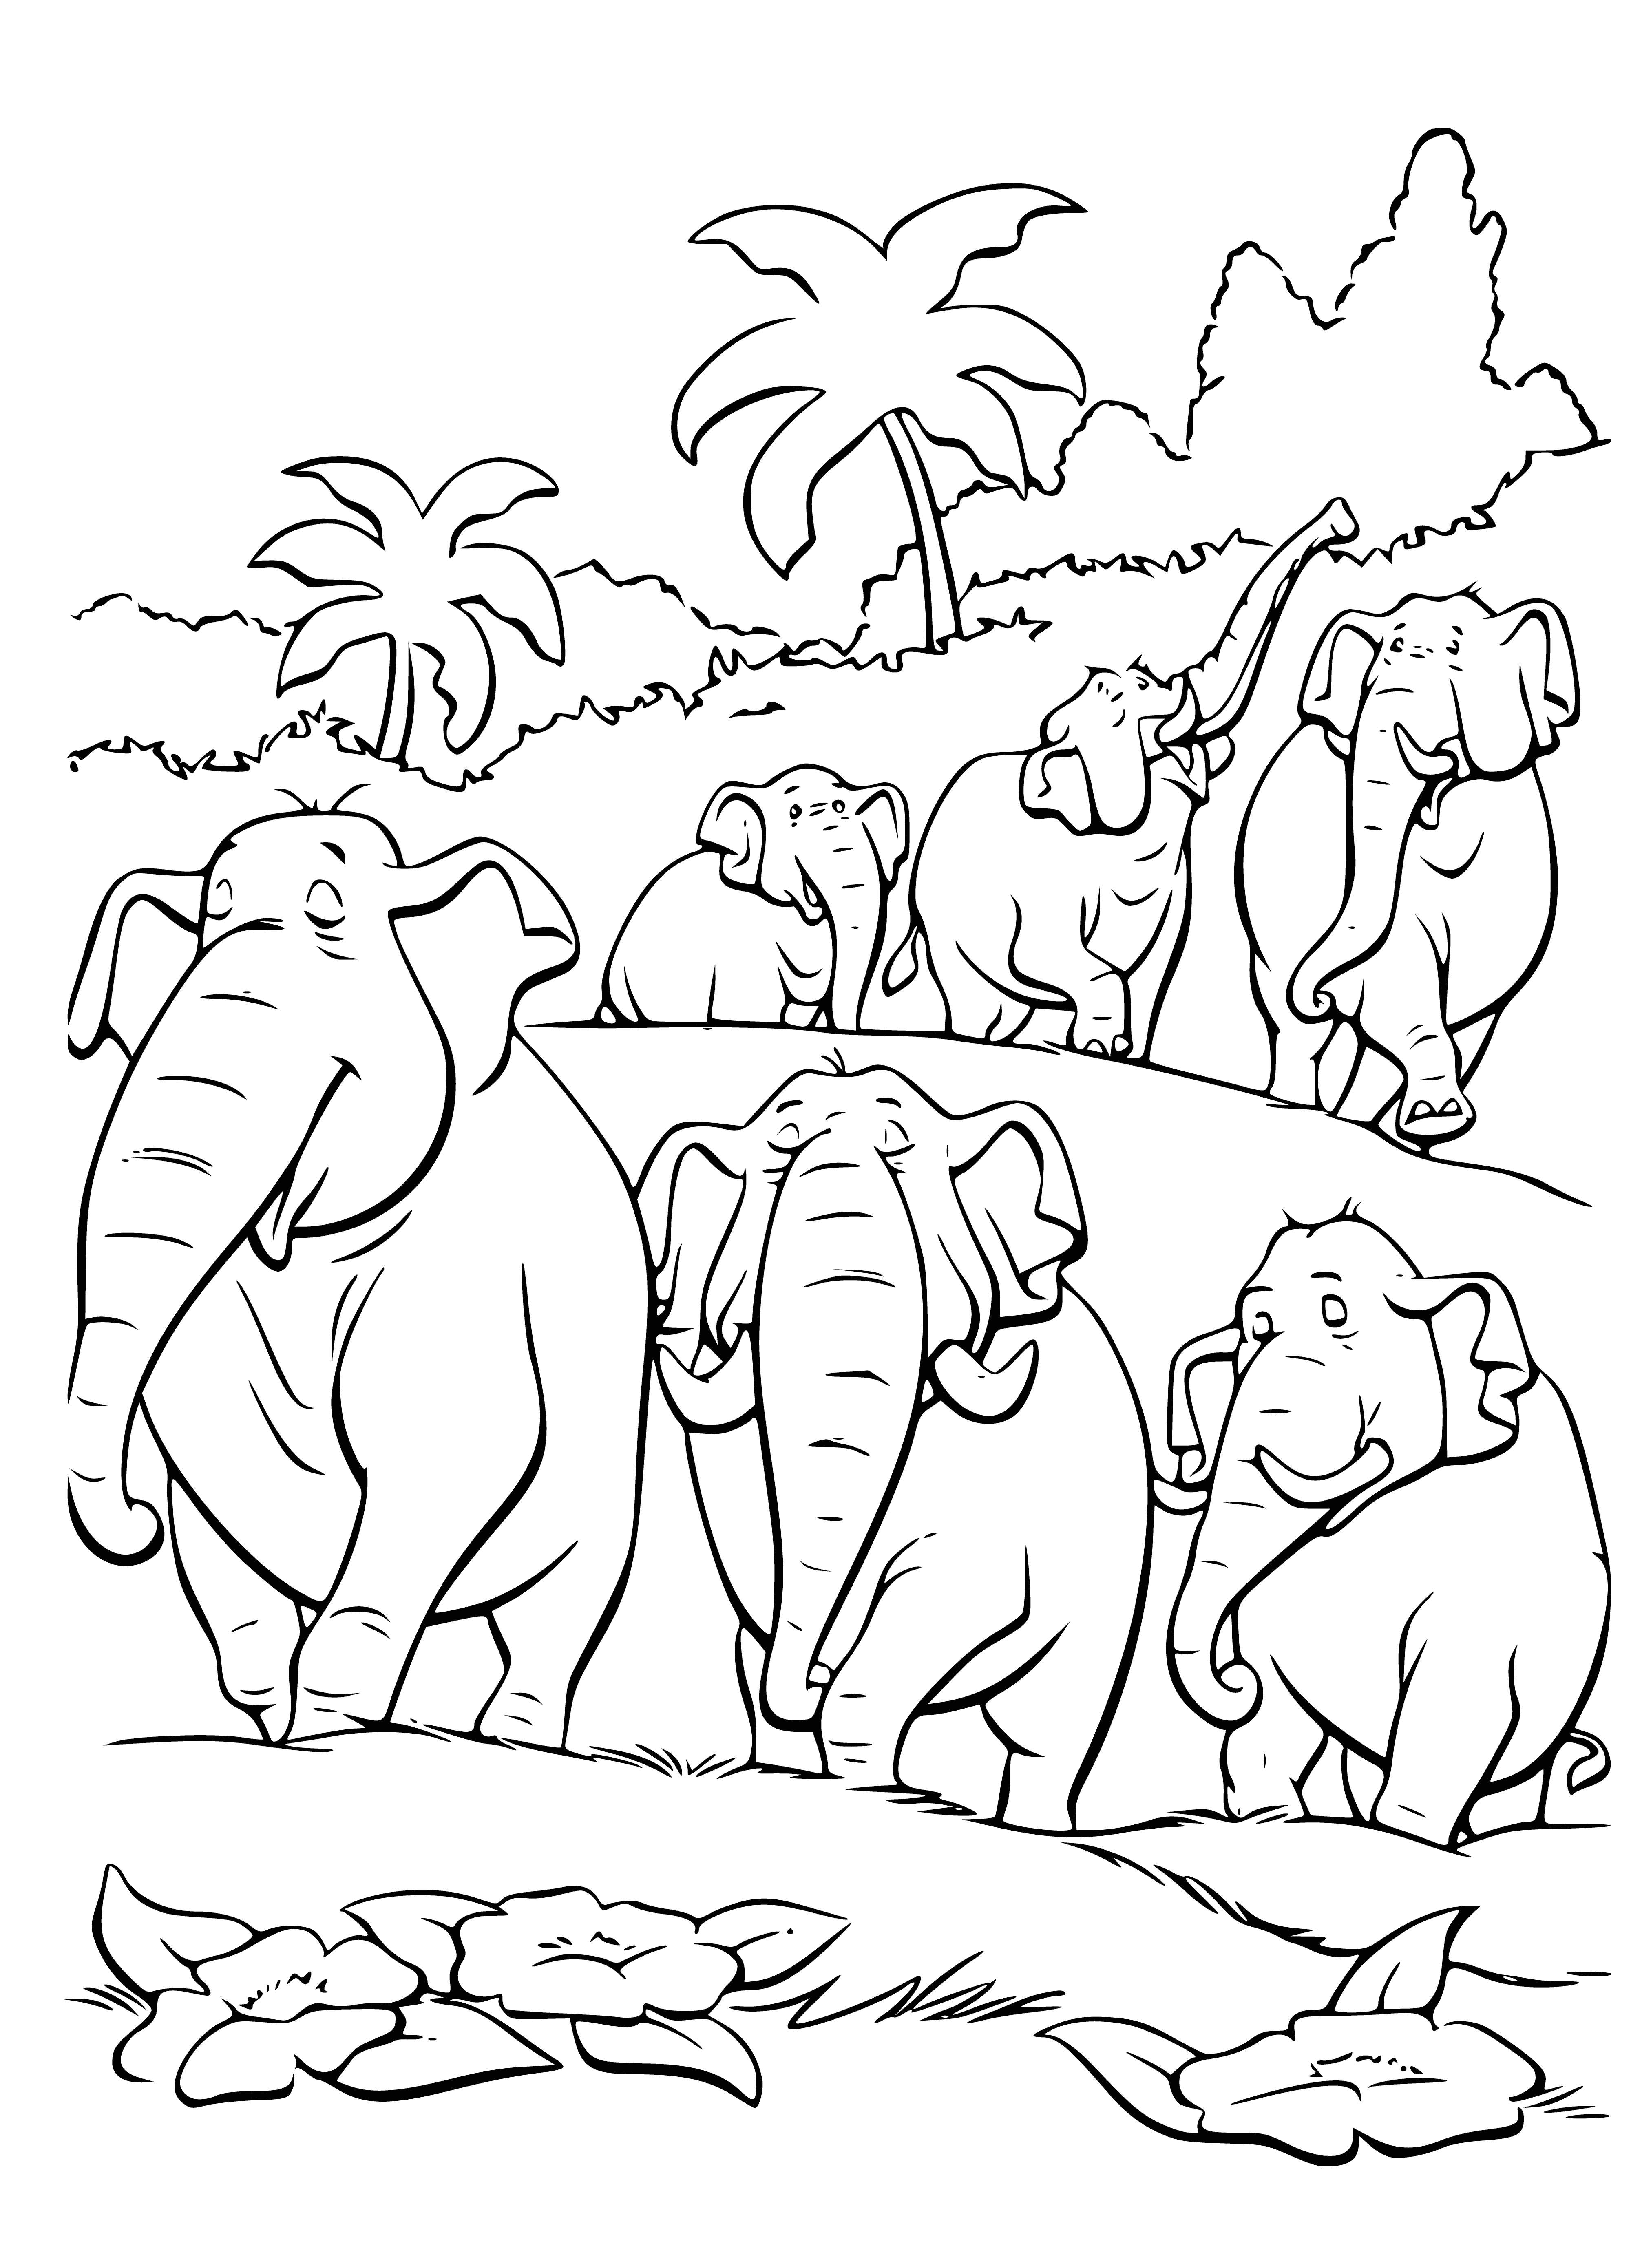 coloring page: Elephant soldiers stand in line, ready for battle. Trunks raised, tusks sharpened, wearing armor and carrying shields. Jungle alive with sounds of animals and birds. #elephantsoldiers #battle